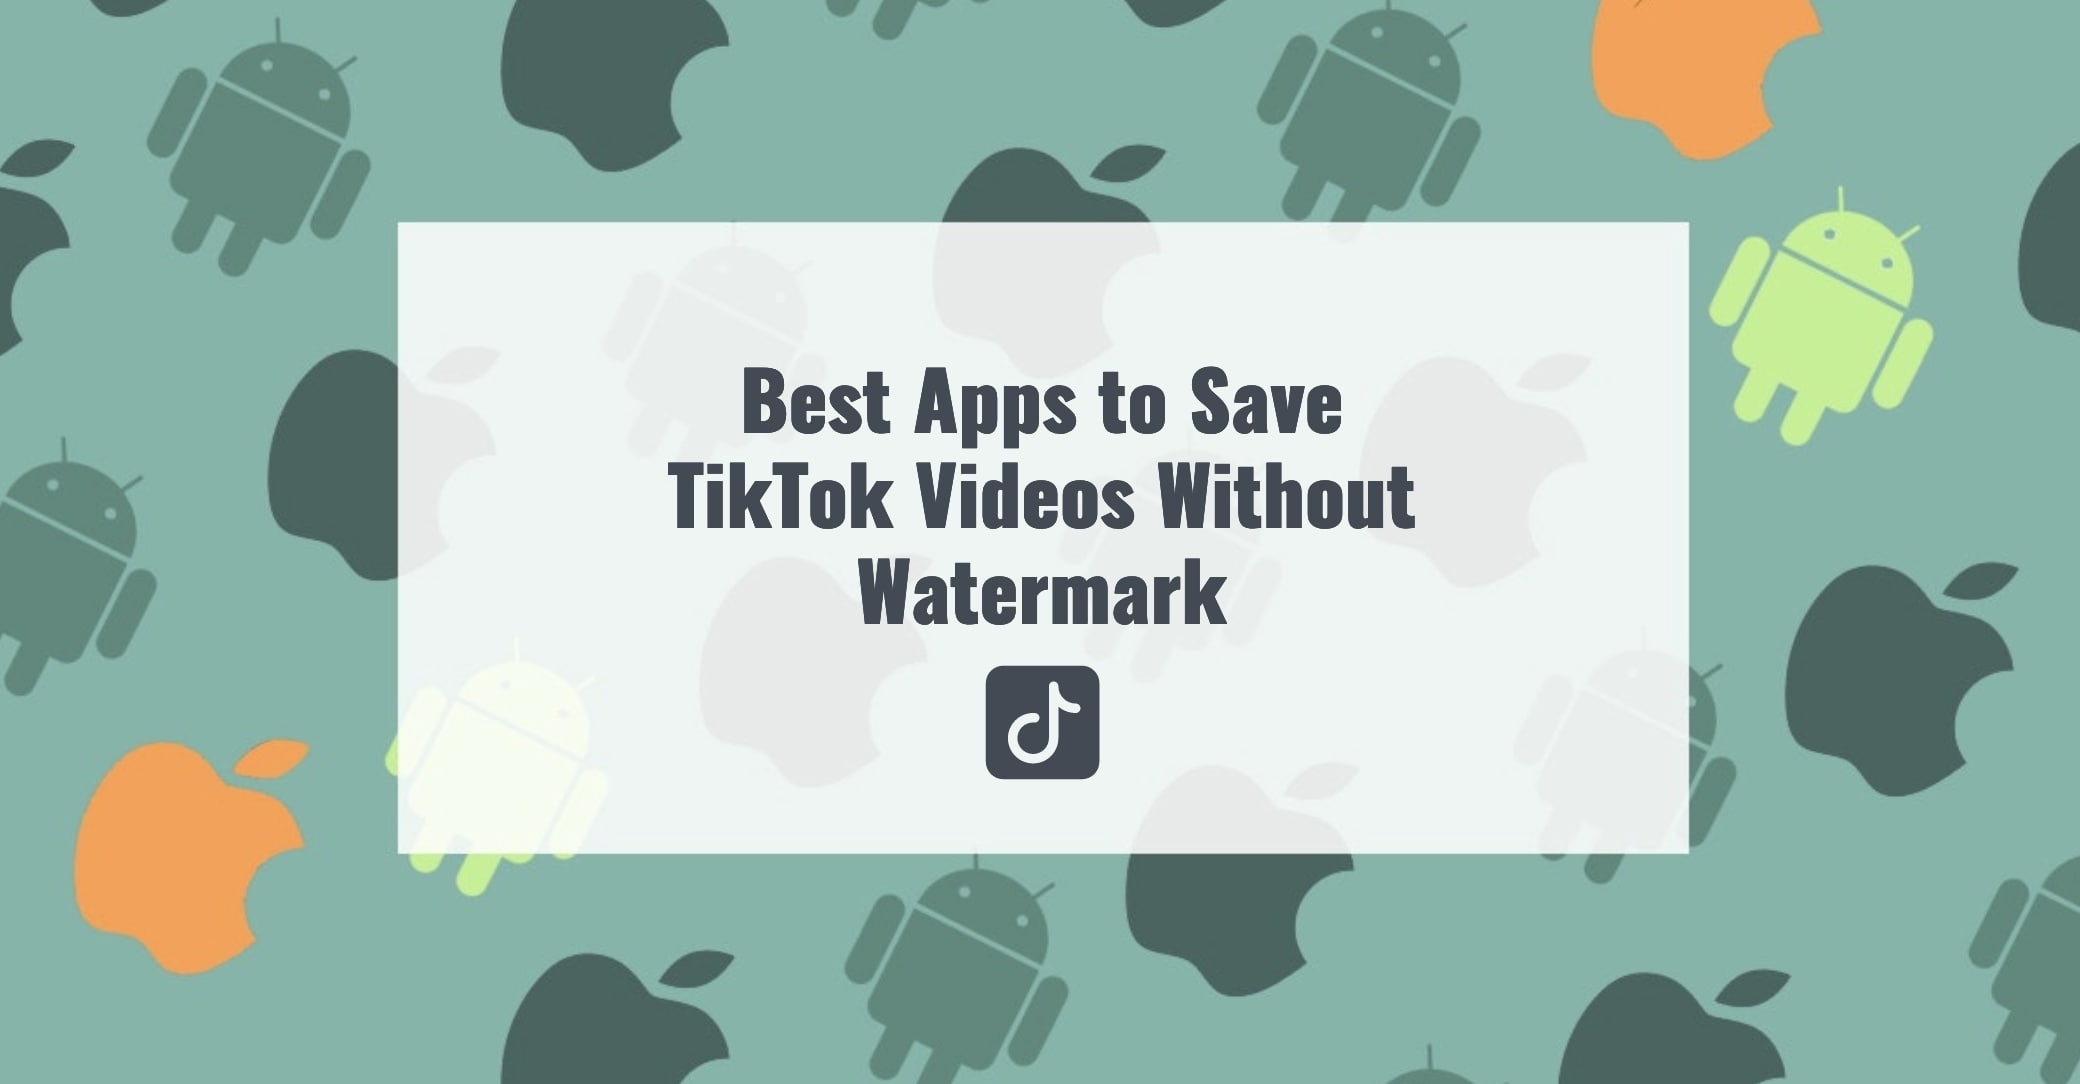 Best Apps to Save TikTok Videos Without Watermark